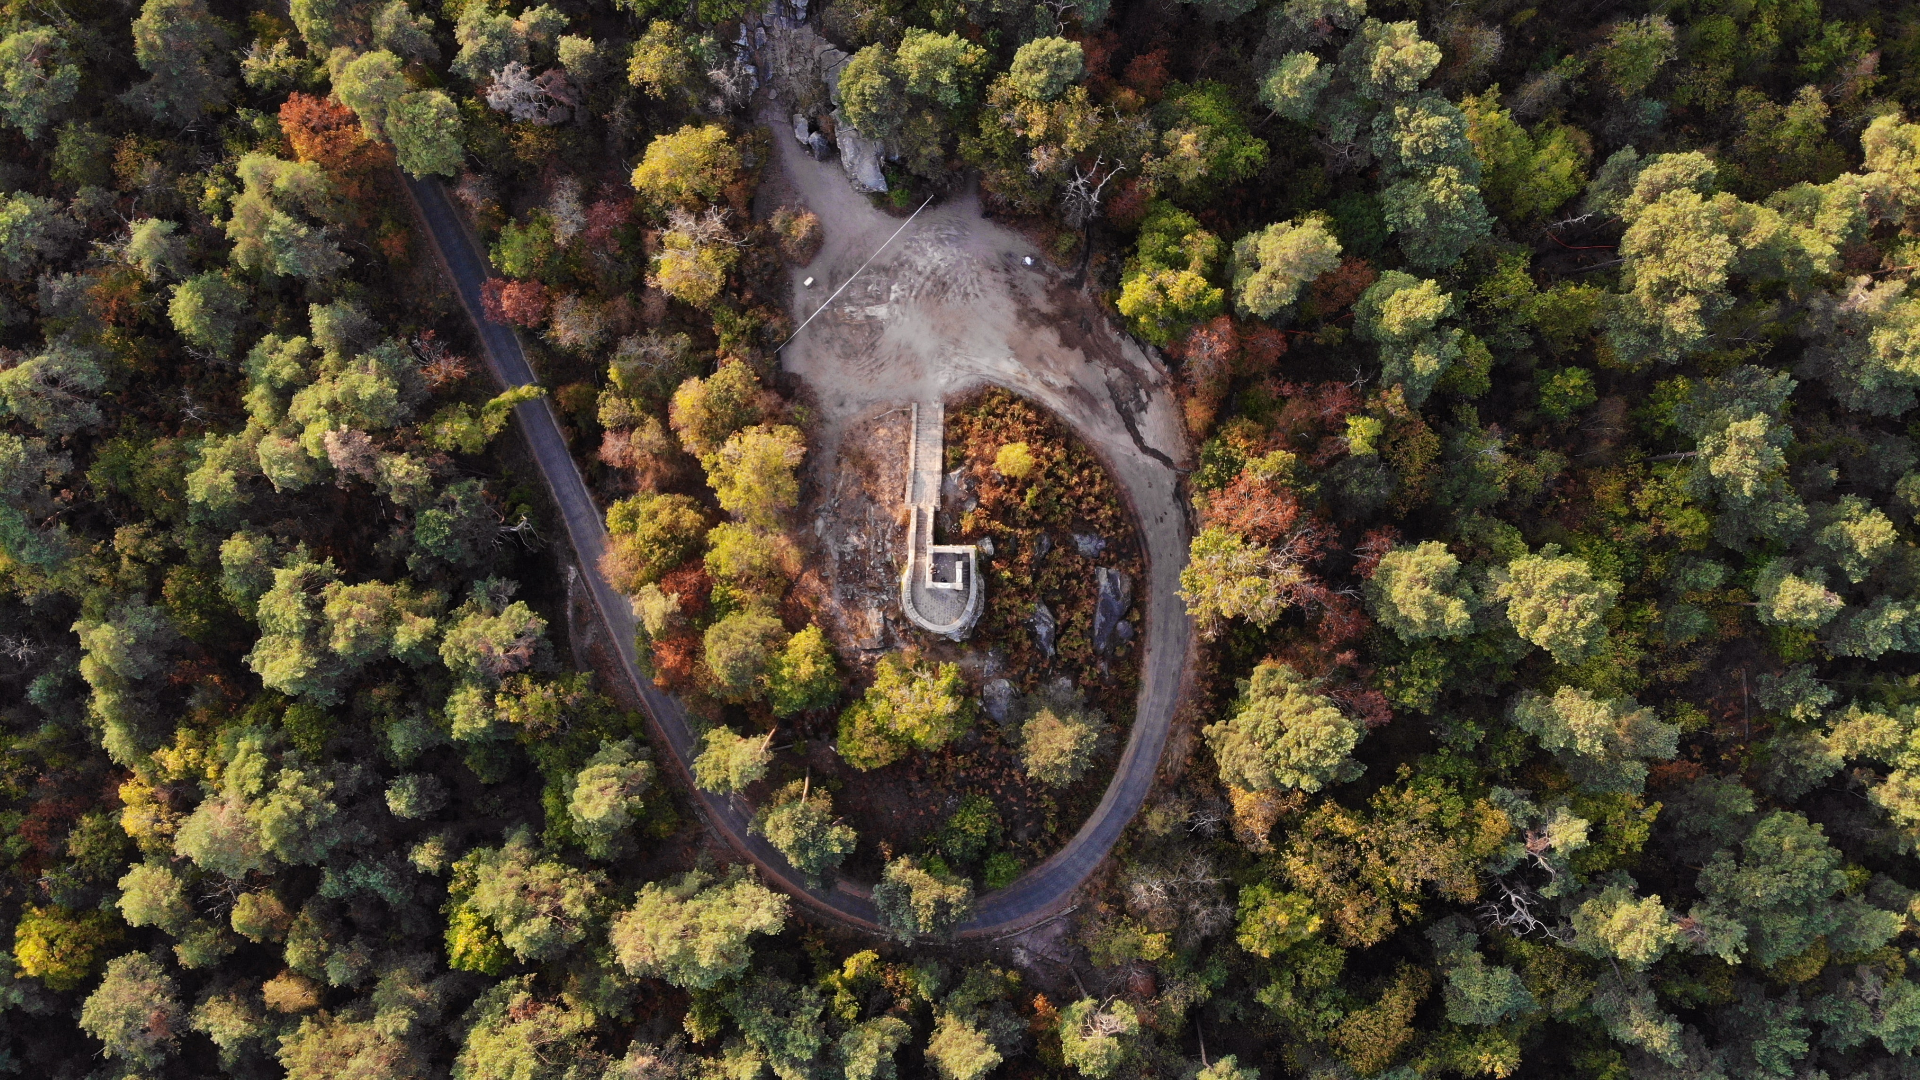 General 1920x1080 nature landscape trees plants grass rocks forest road aerial view drone photo